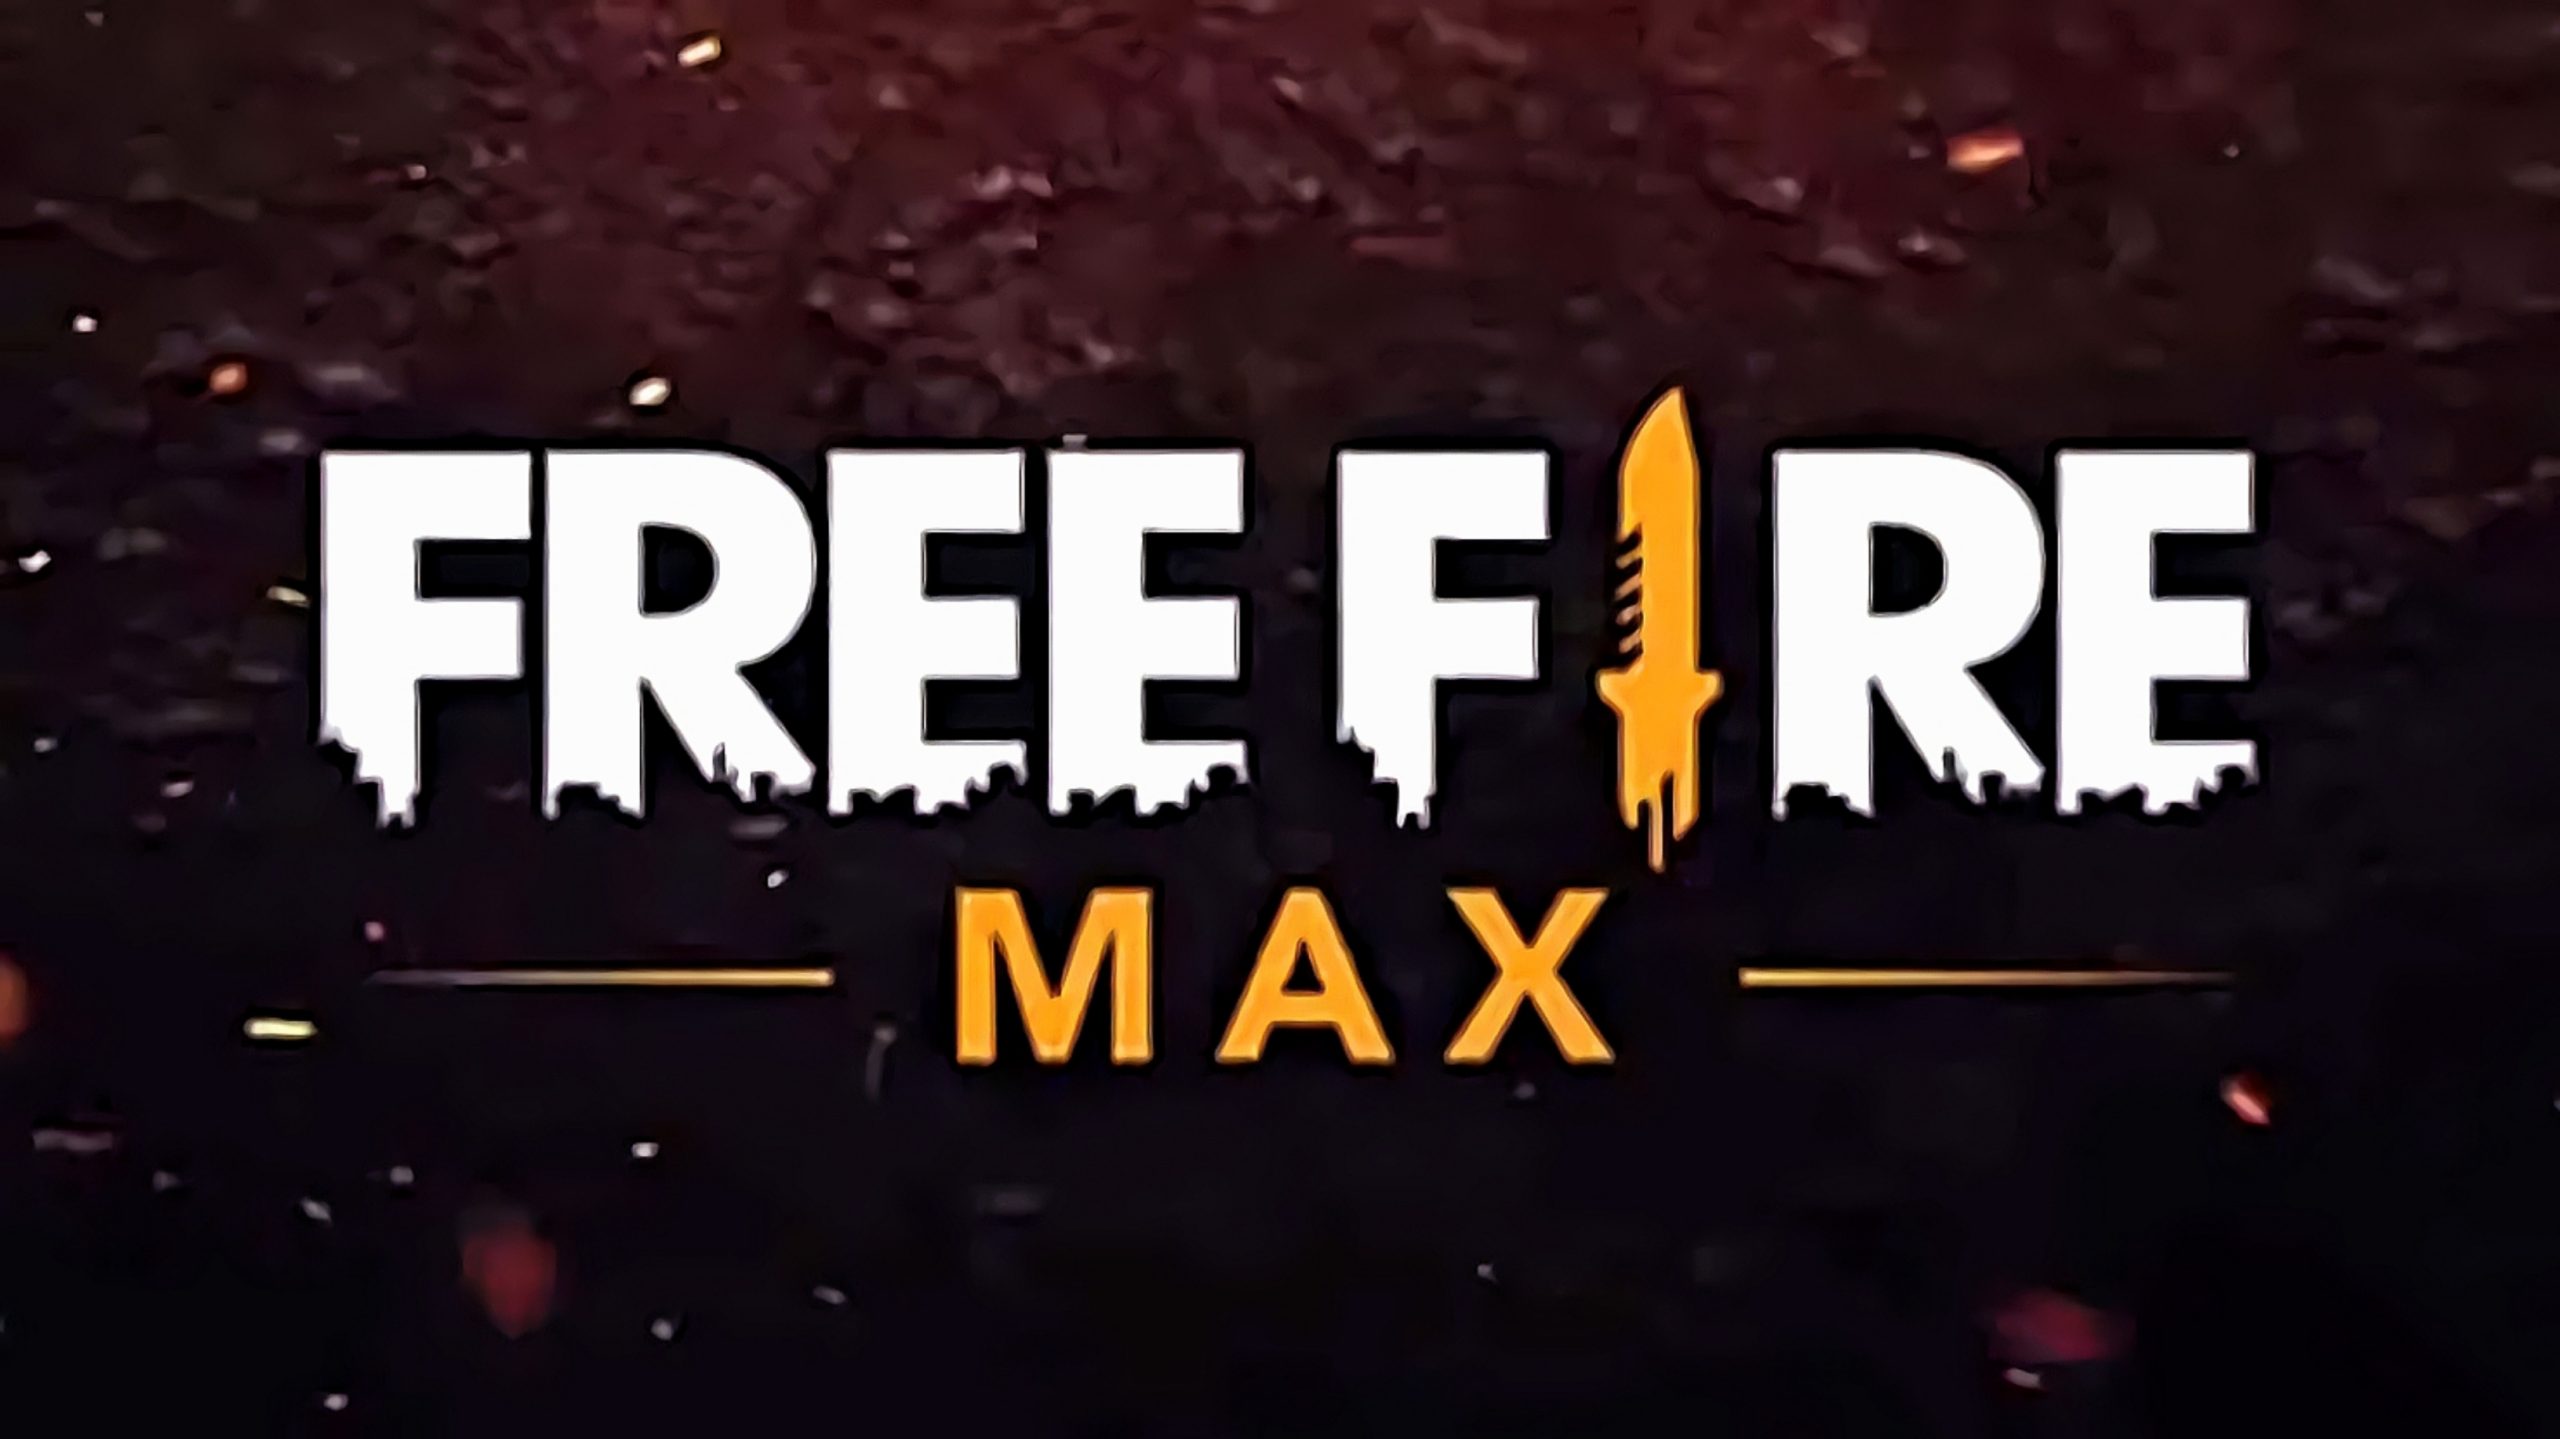 Today Free Fire Max Redeem Code 5 December 2022